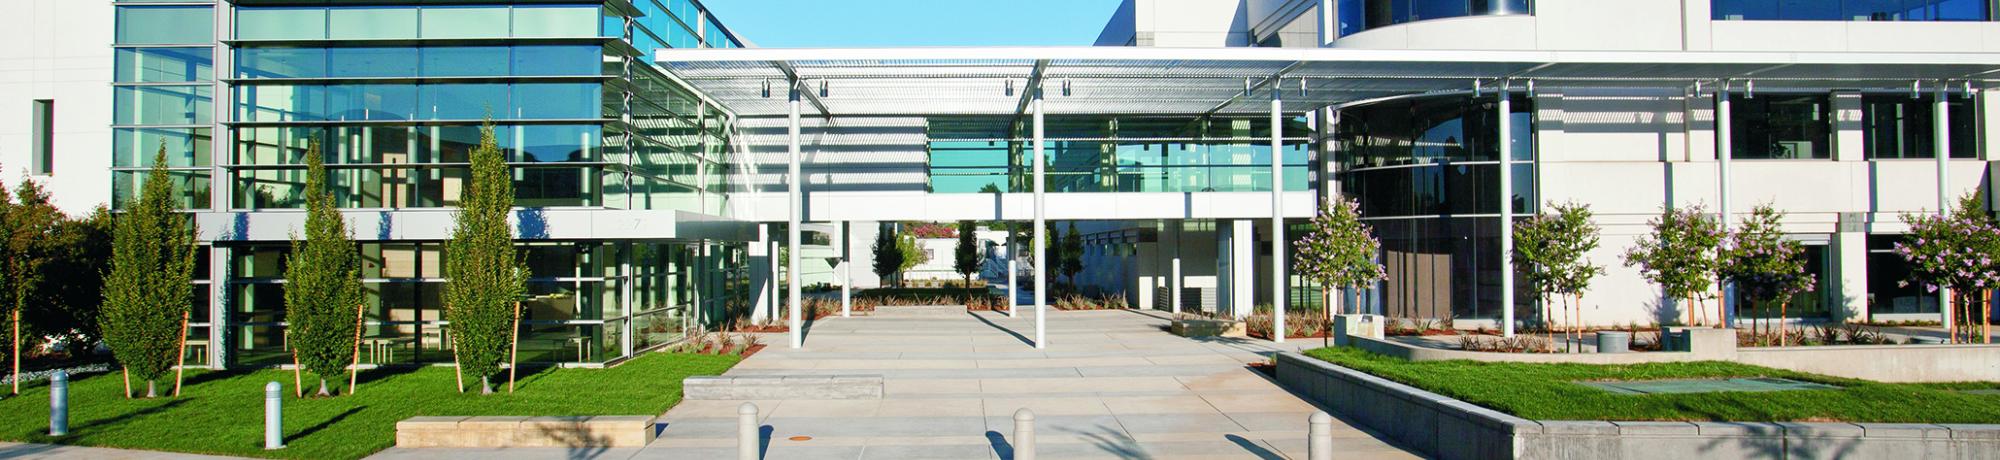 Image of the exterior of the UC Davis health Cancer Center building